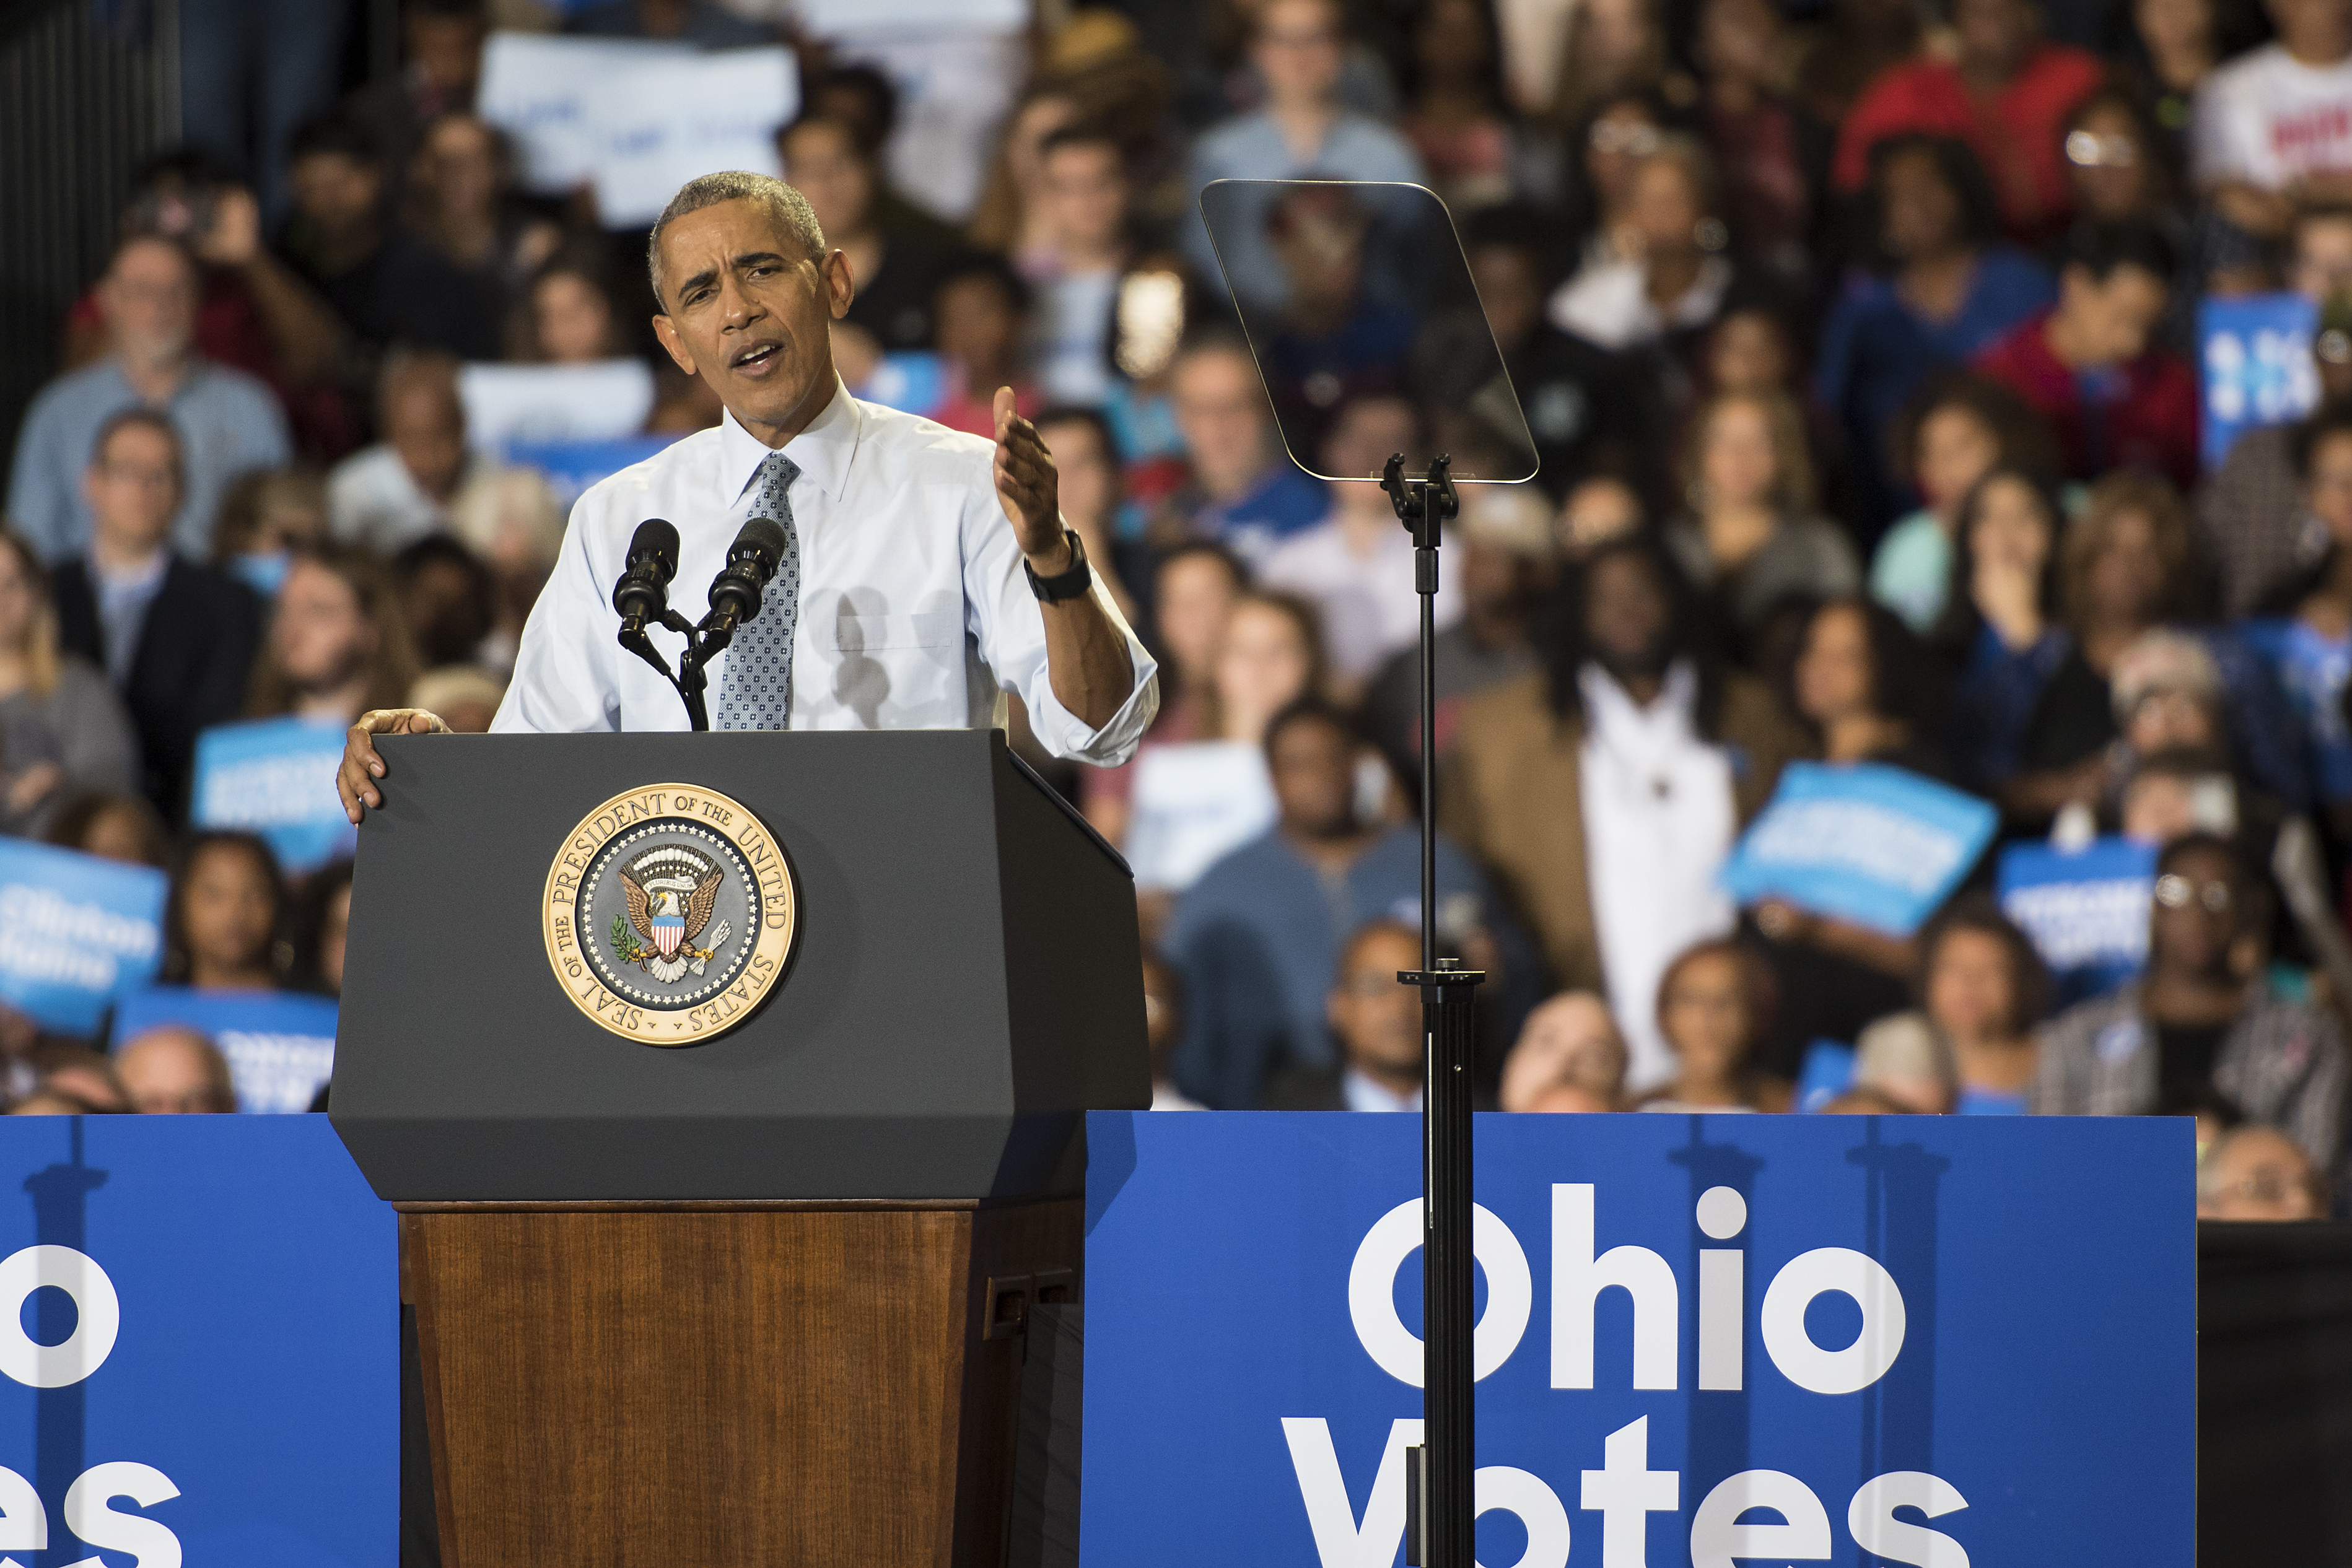 President Obama visits Capital, calls on Ohioans to vote for progress